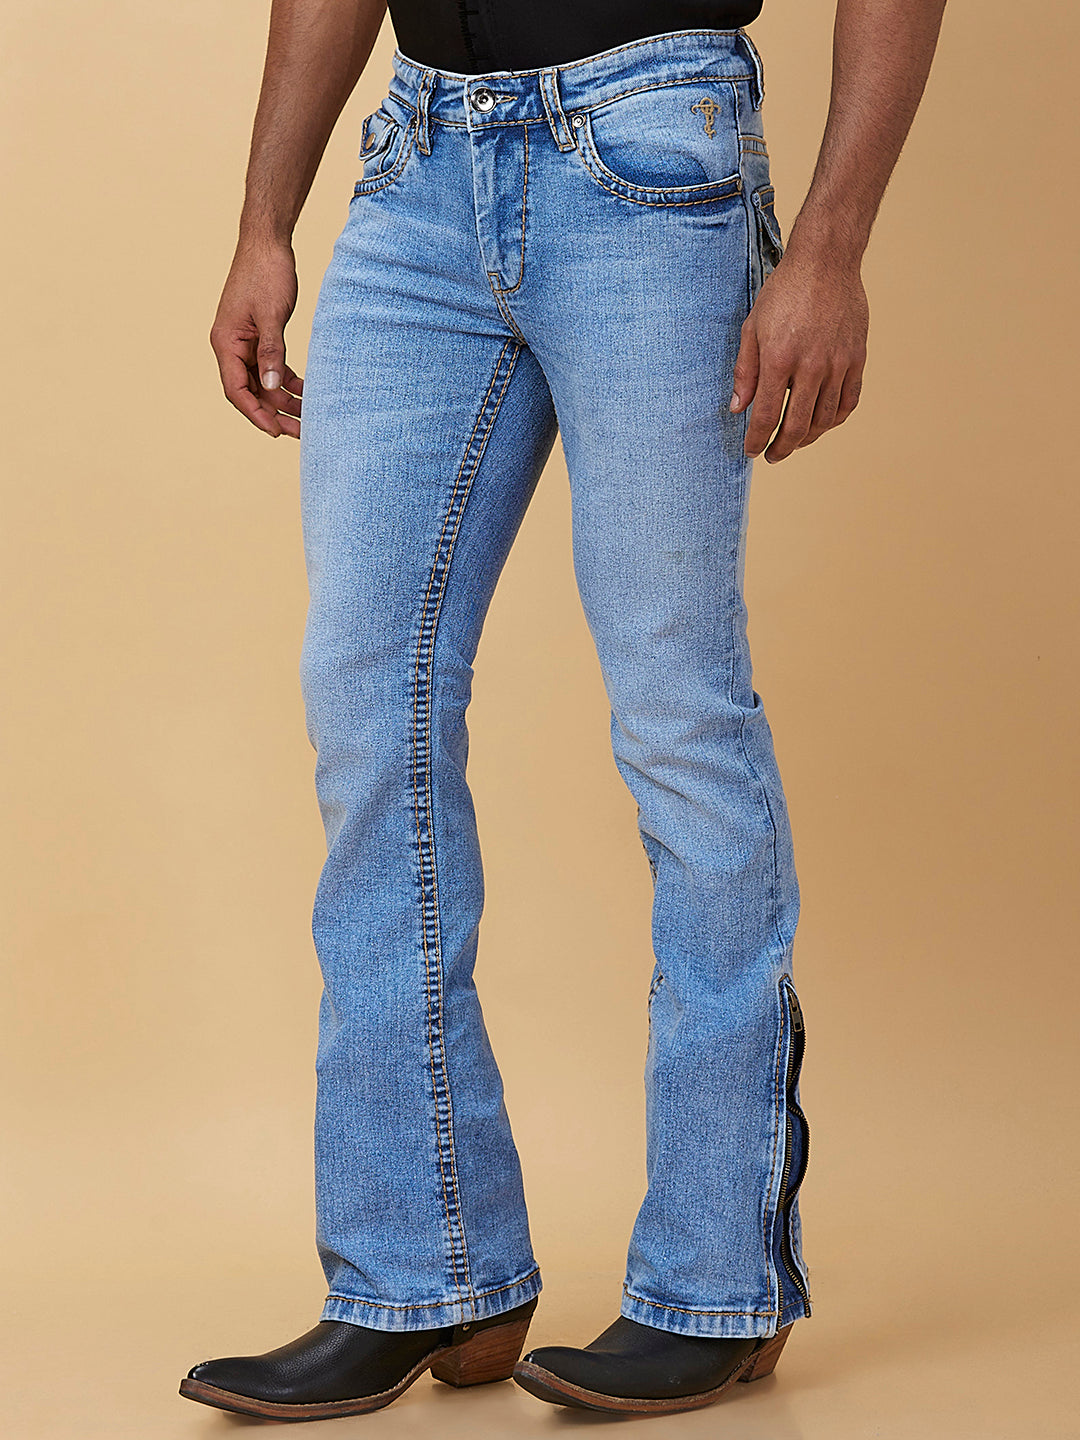 Blue Bootcut Jeans saddle stitched